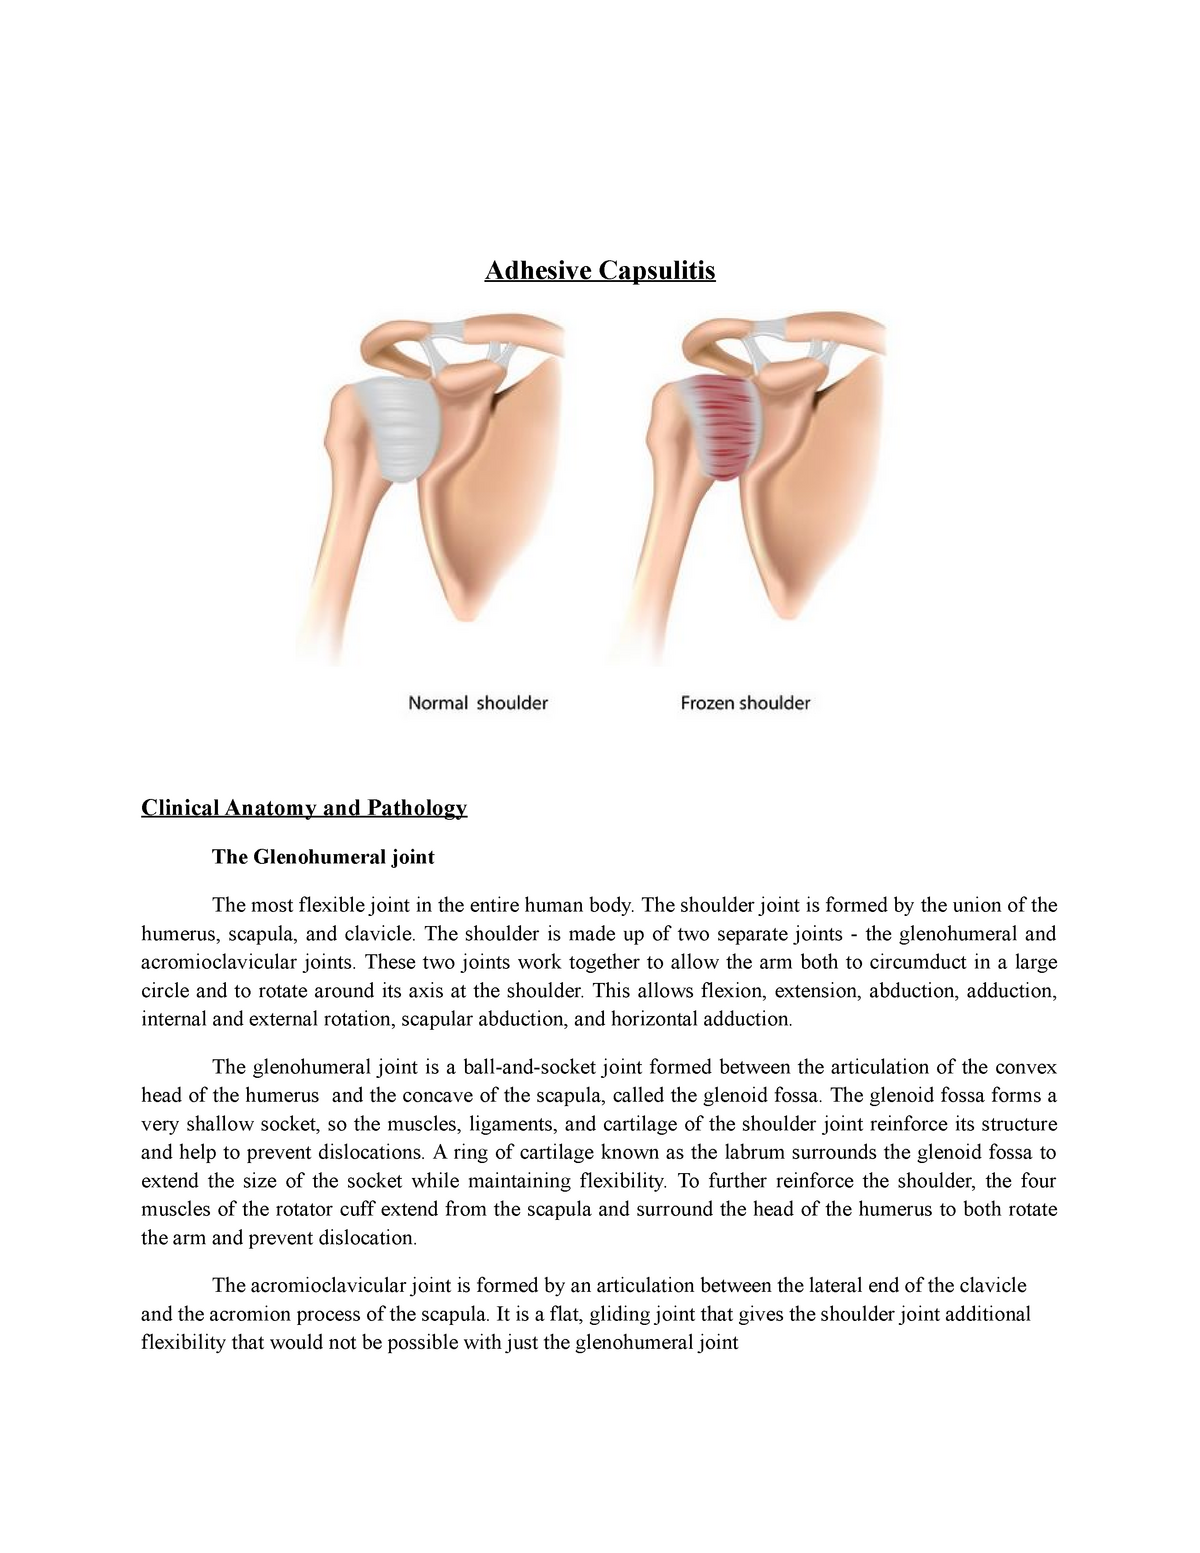 Adhesive Capsulitis A Detailed Discussion About Adhesive Capsulities My Xxx Hot Girl